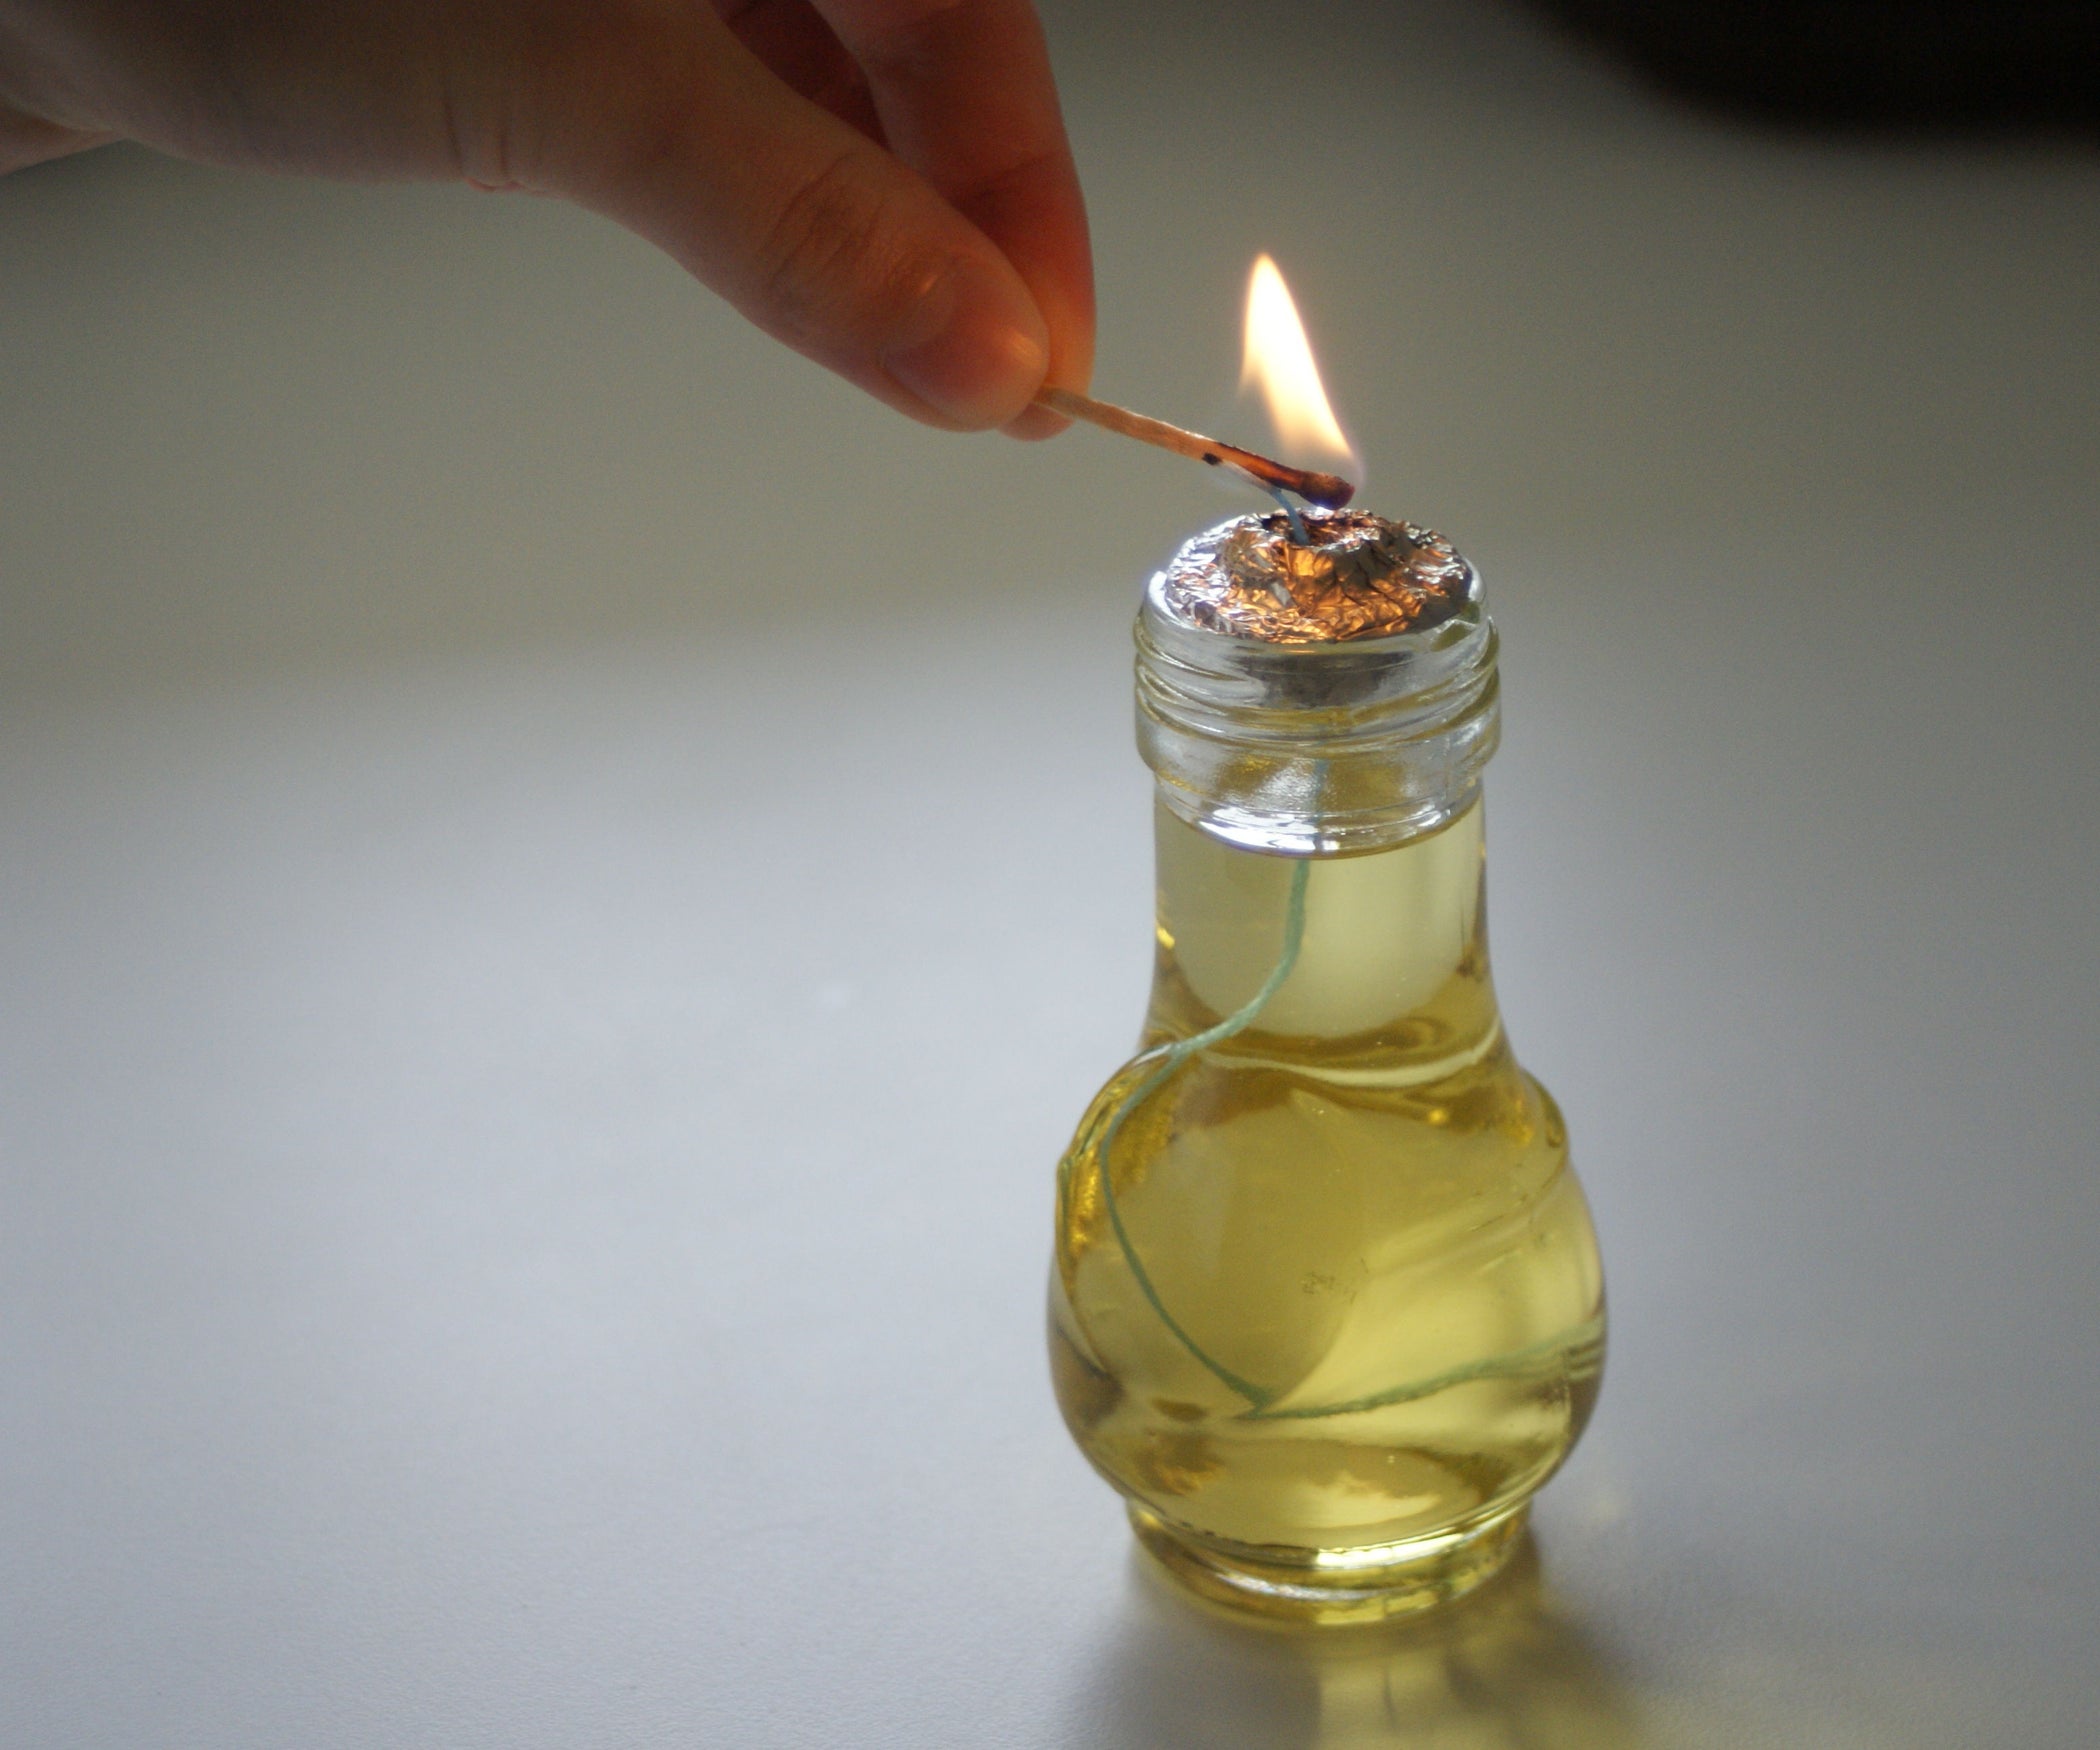 What Kind Of Oil Does An Oil Lamp Use